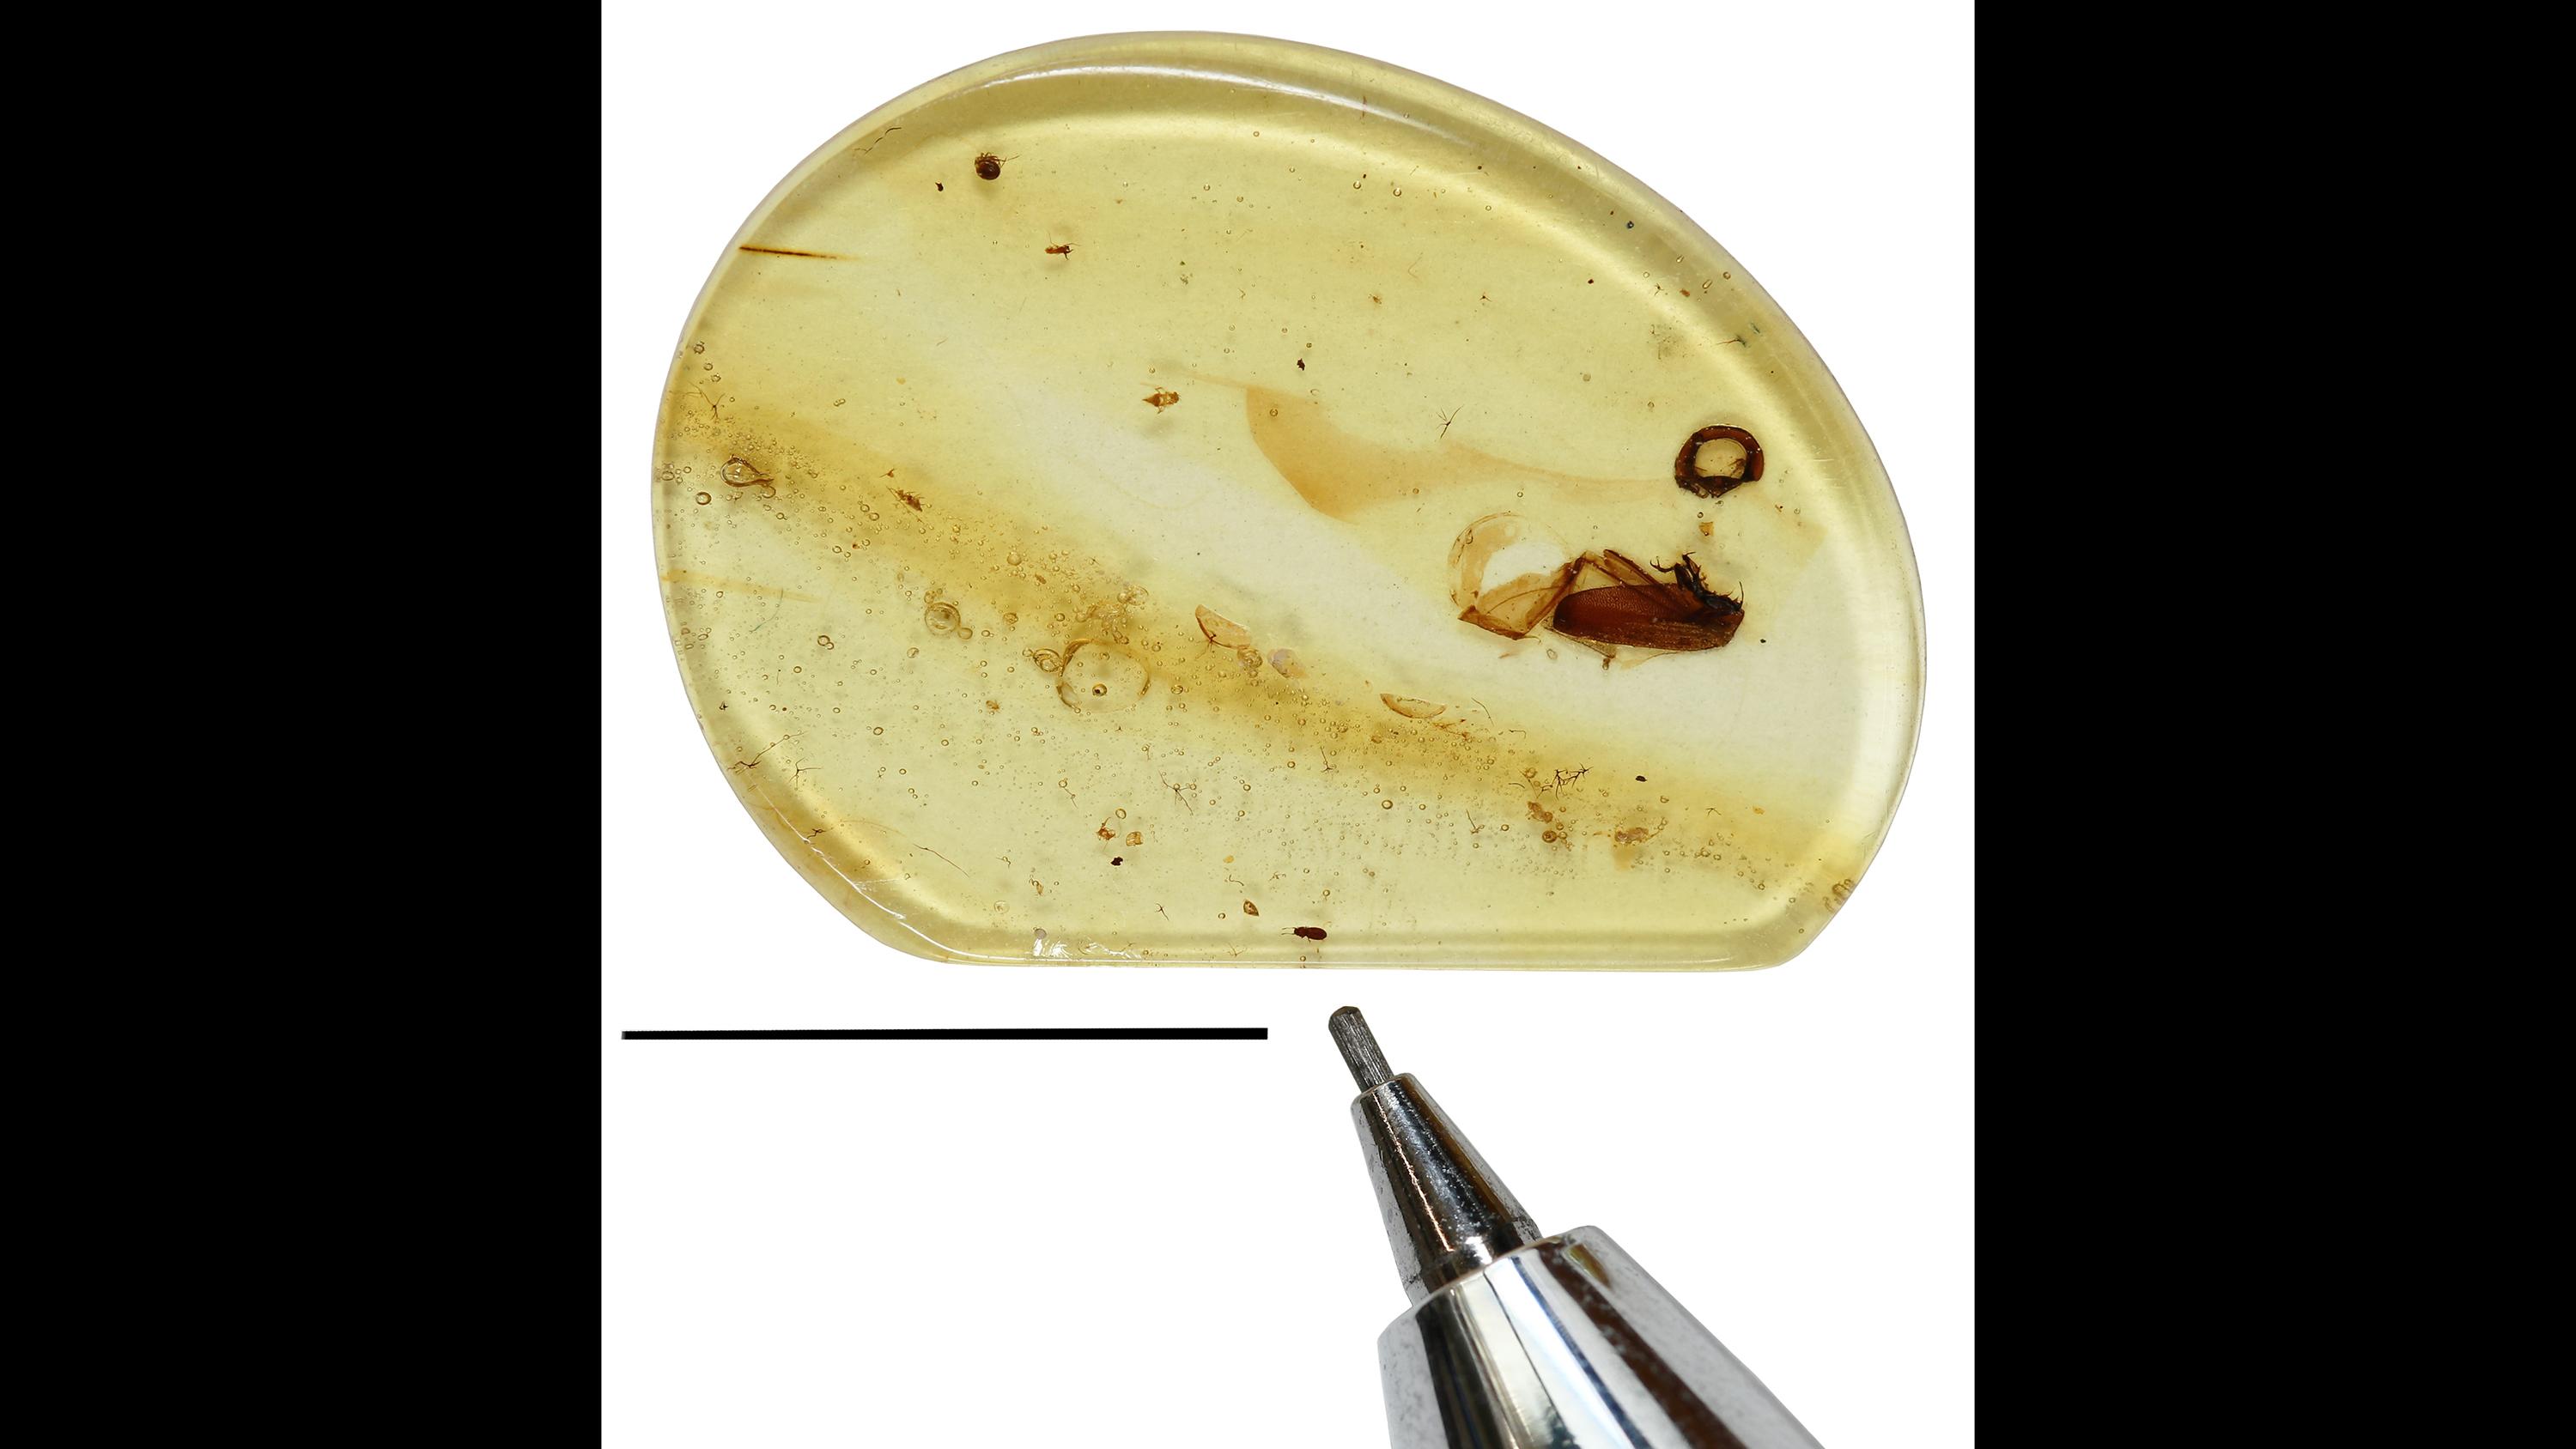 The amber sample with the featherwing beetled trapped inside – the beetle is the tiny speck above the tip of the mechanical pencil. (Courtesy The Field Museum)